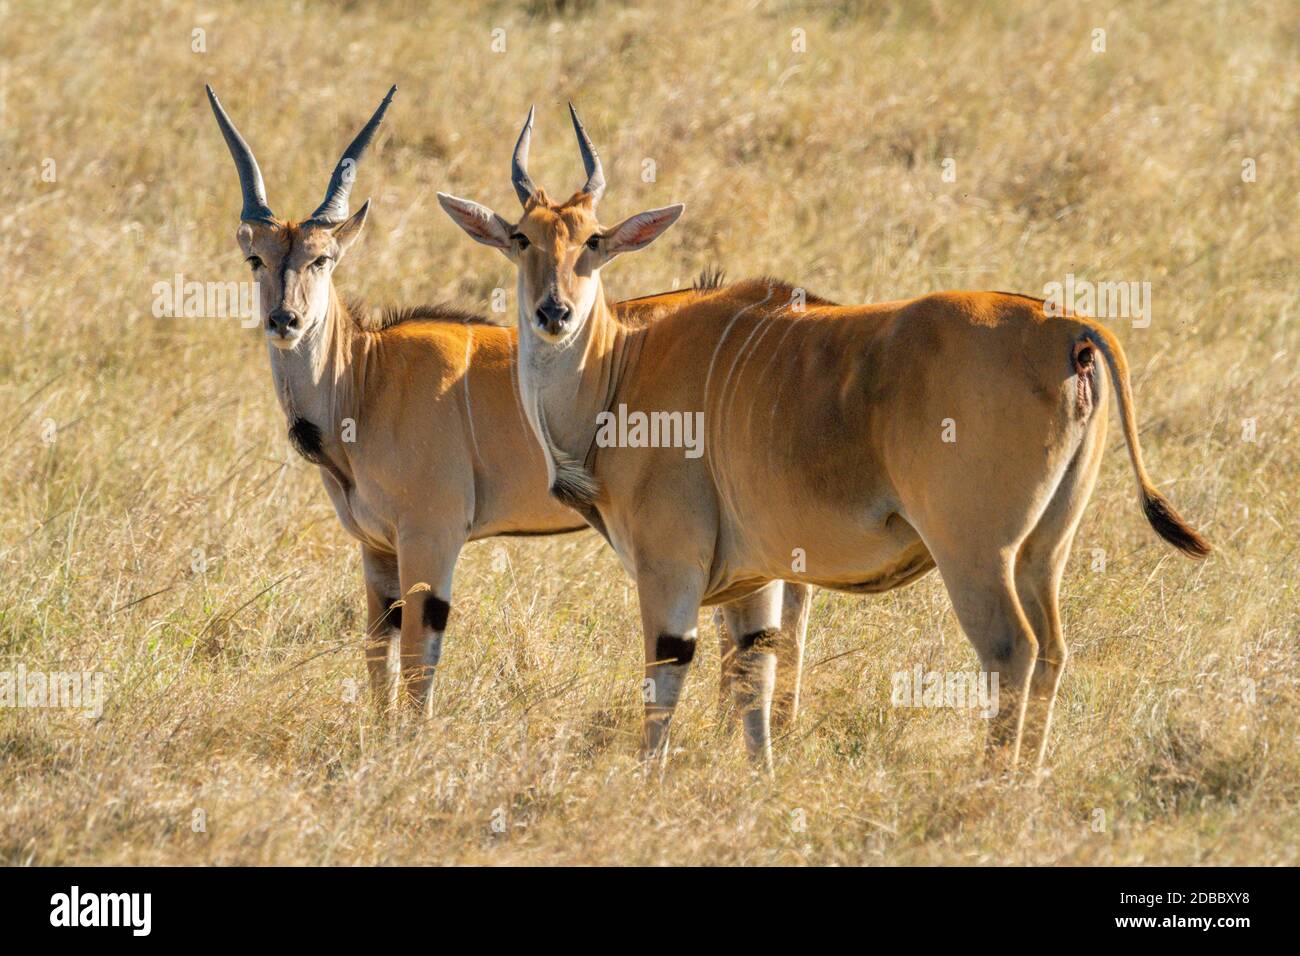 Two eland stand in grass eyeing camera Stock Photo